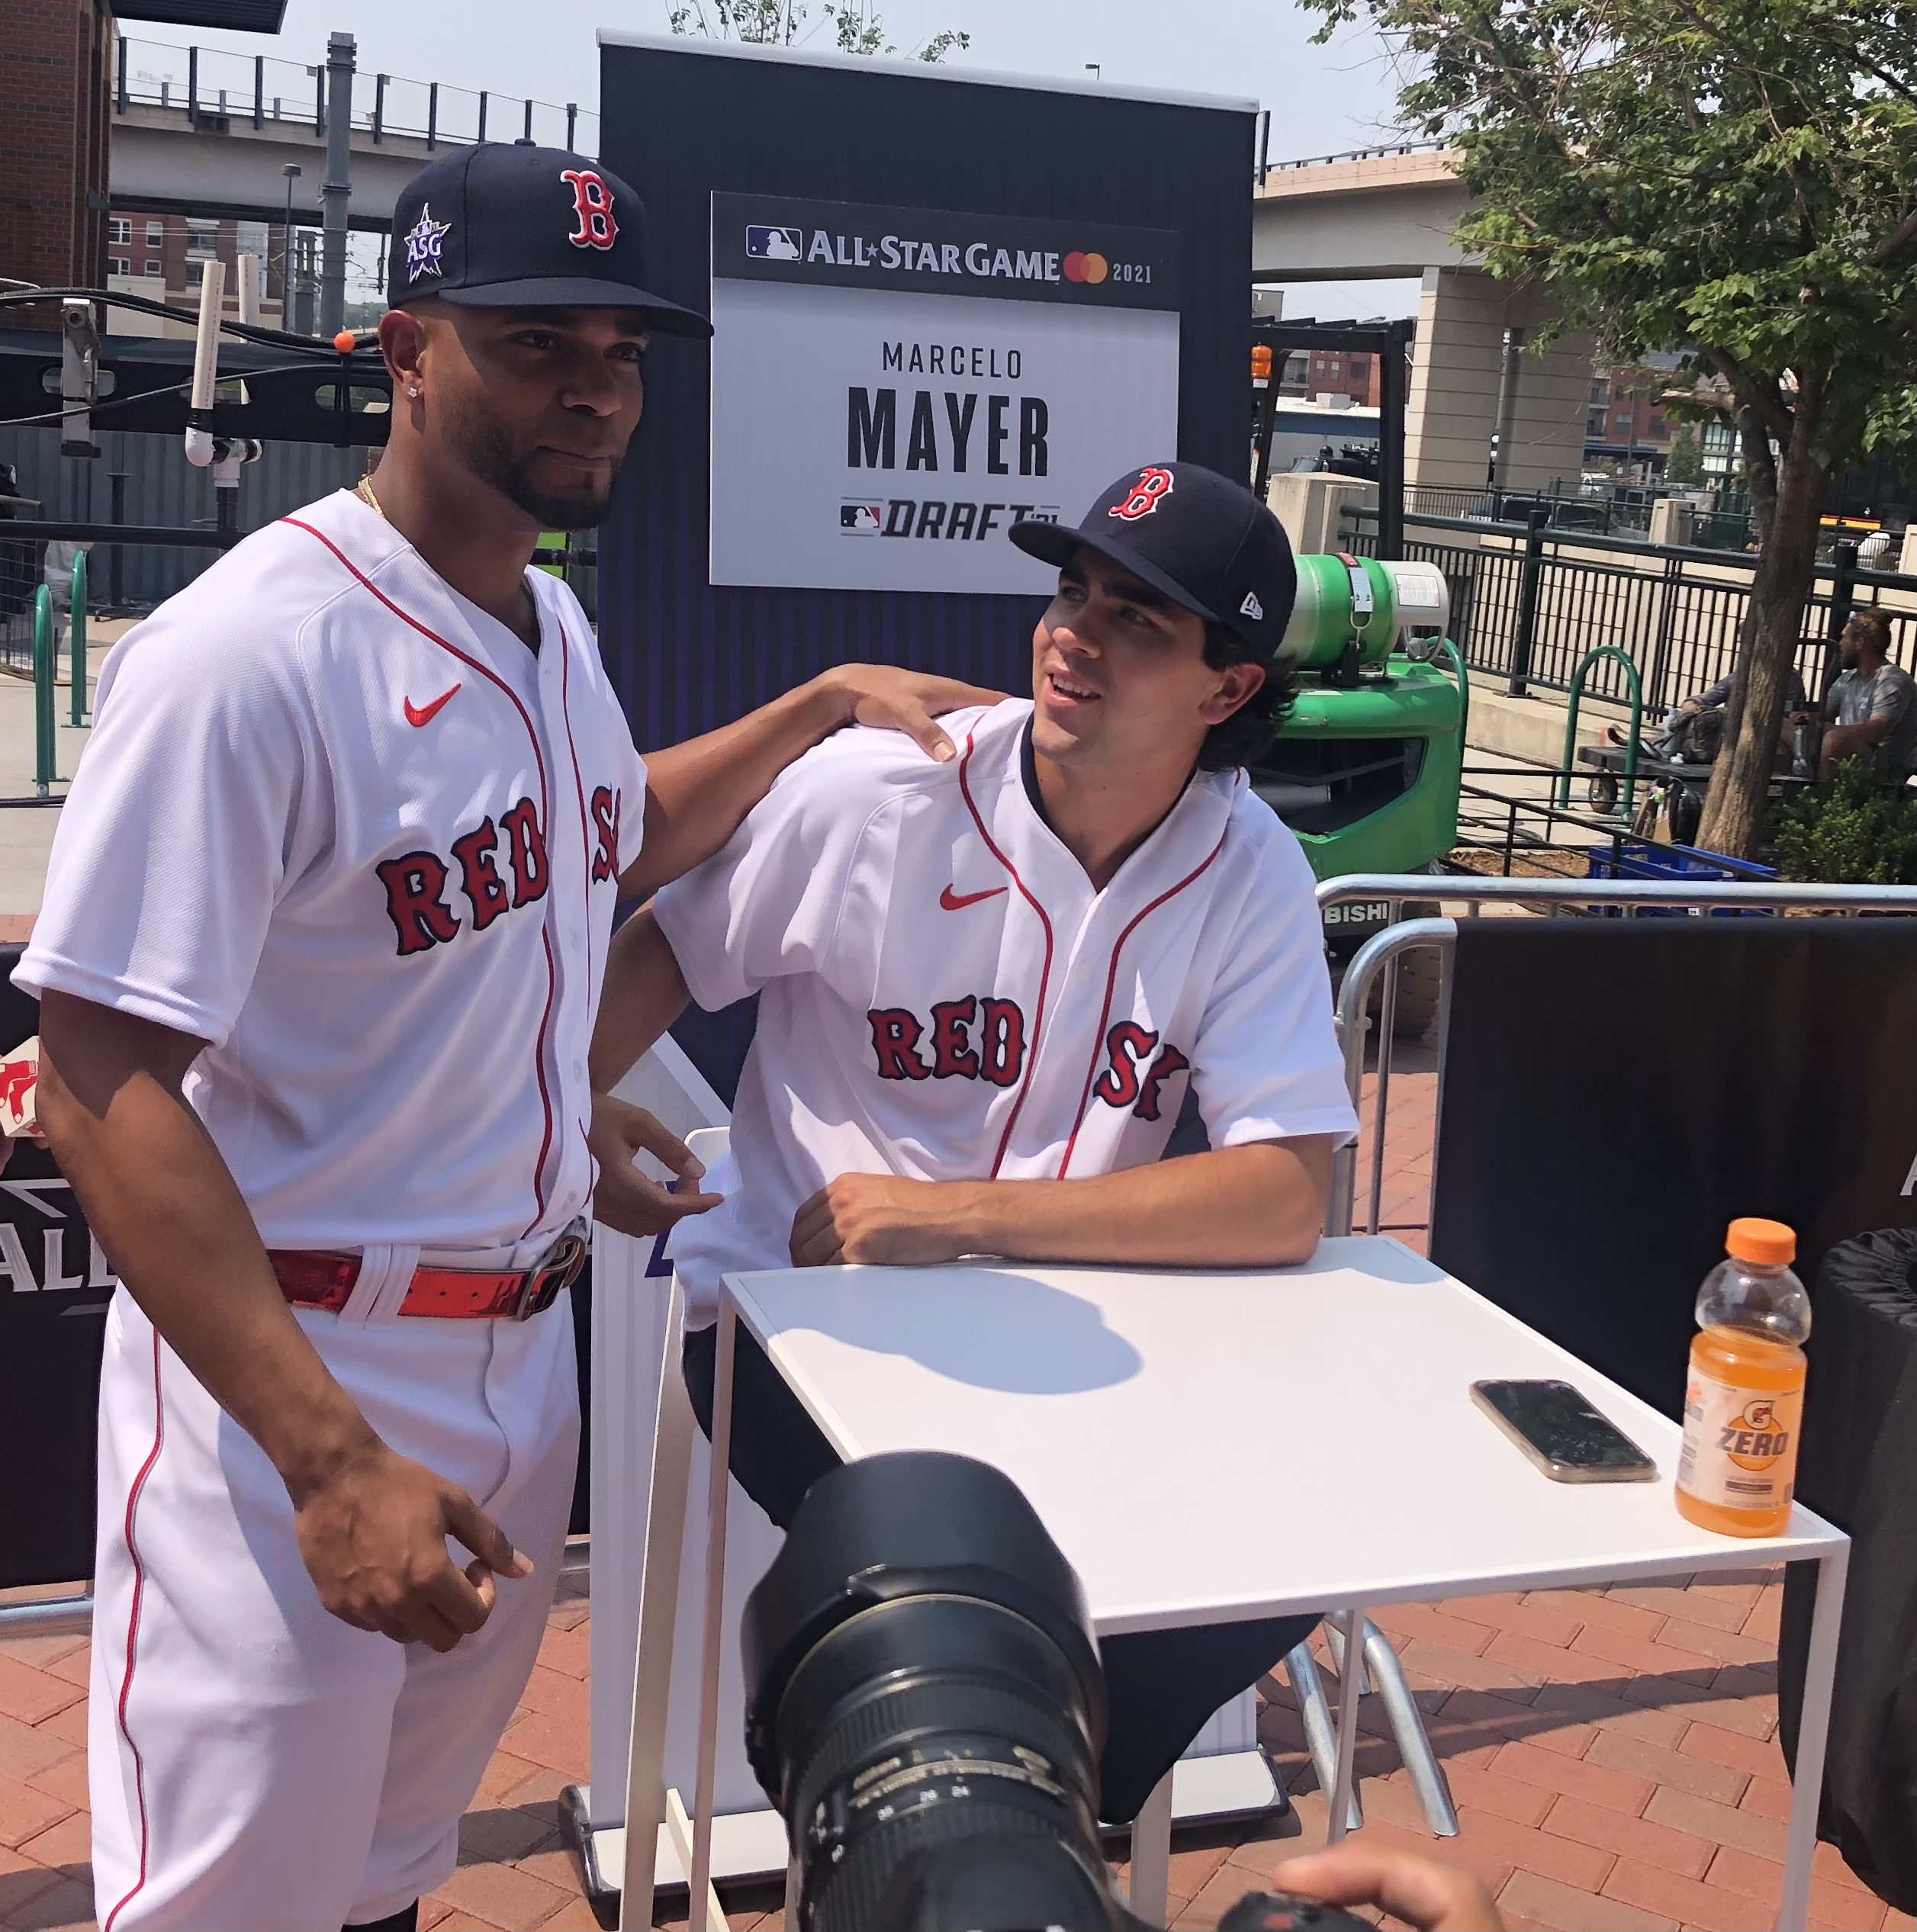 Present and future collide as Xander Bogaerts eagerly welcomes Red Sox' top  draft pick Marcelo Mayer - The Boston Globe